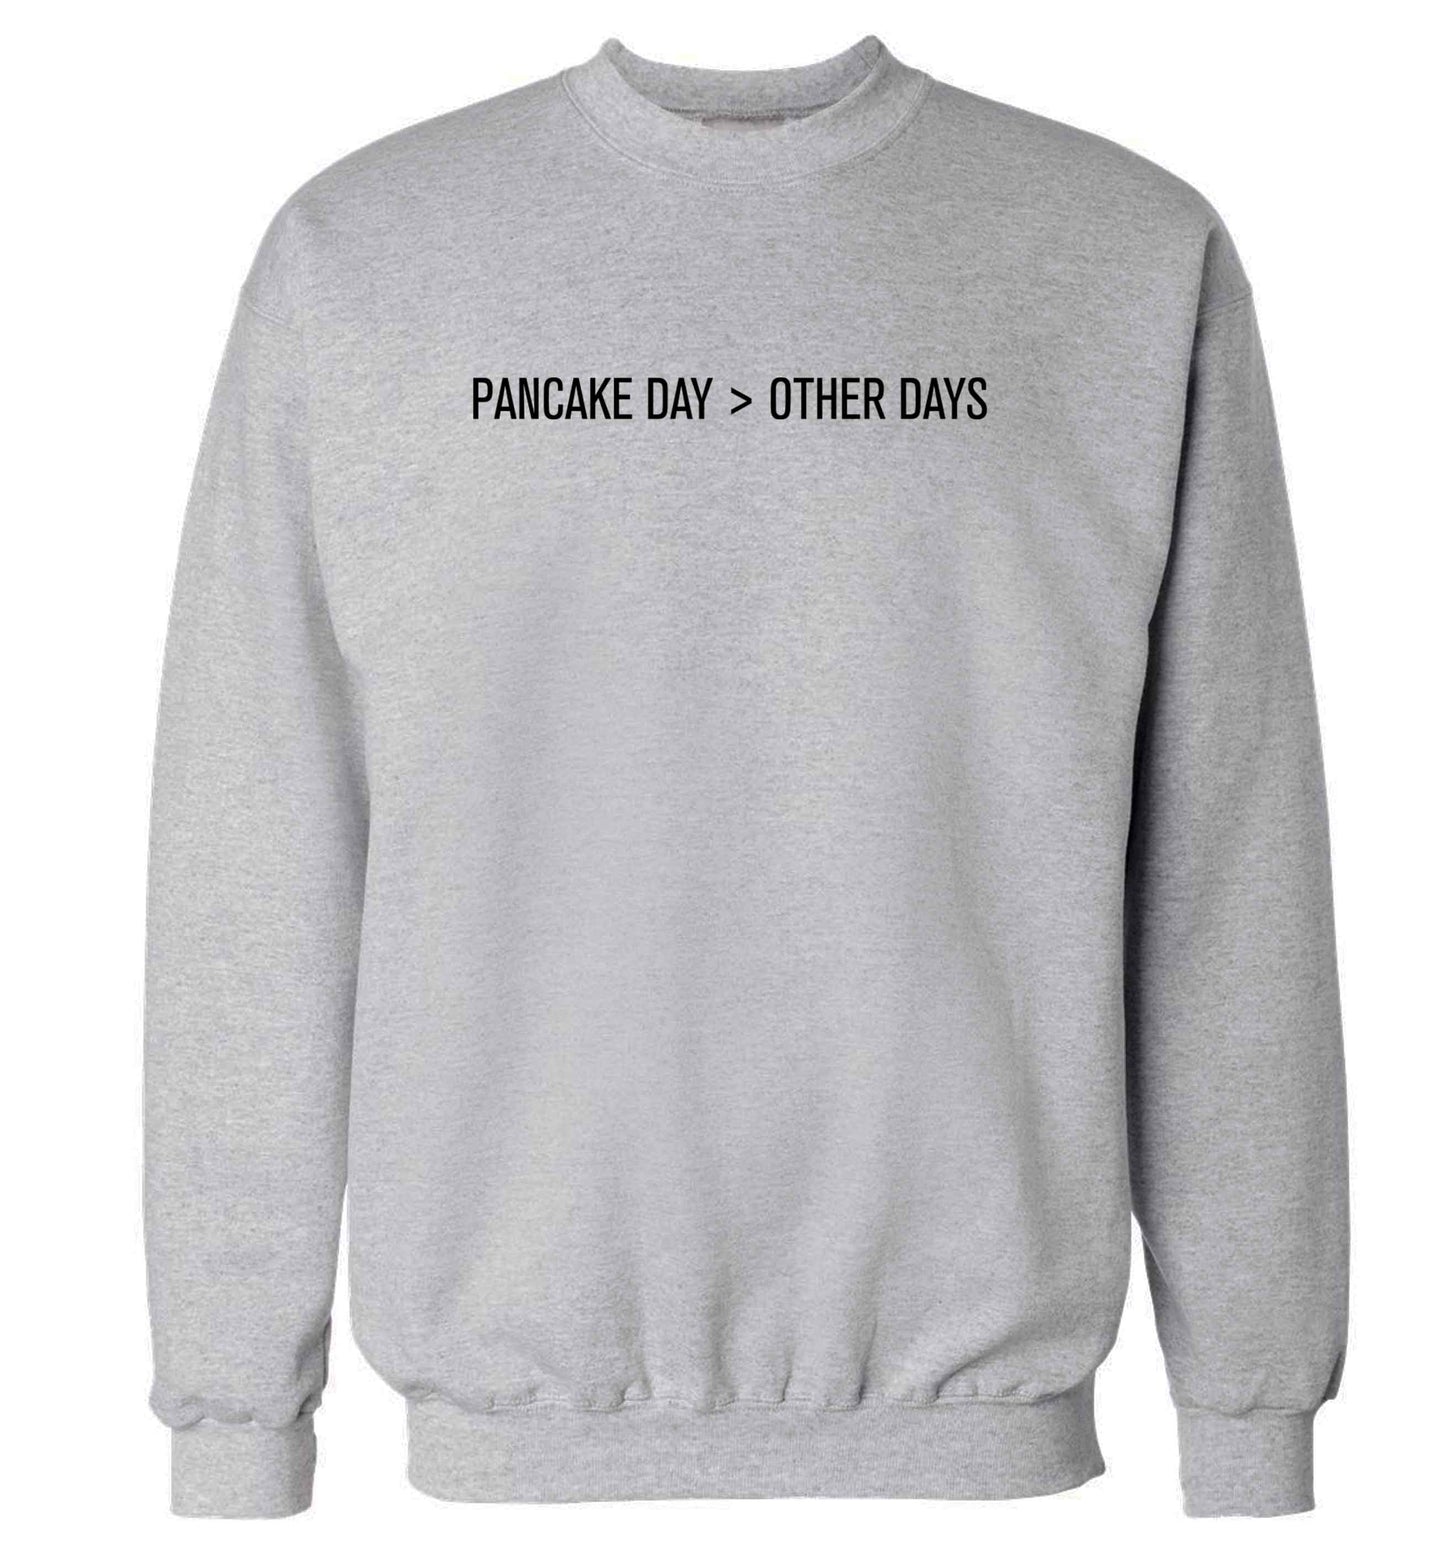 Pancake day > other days adult's unisex grey sweater 2XL